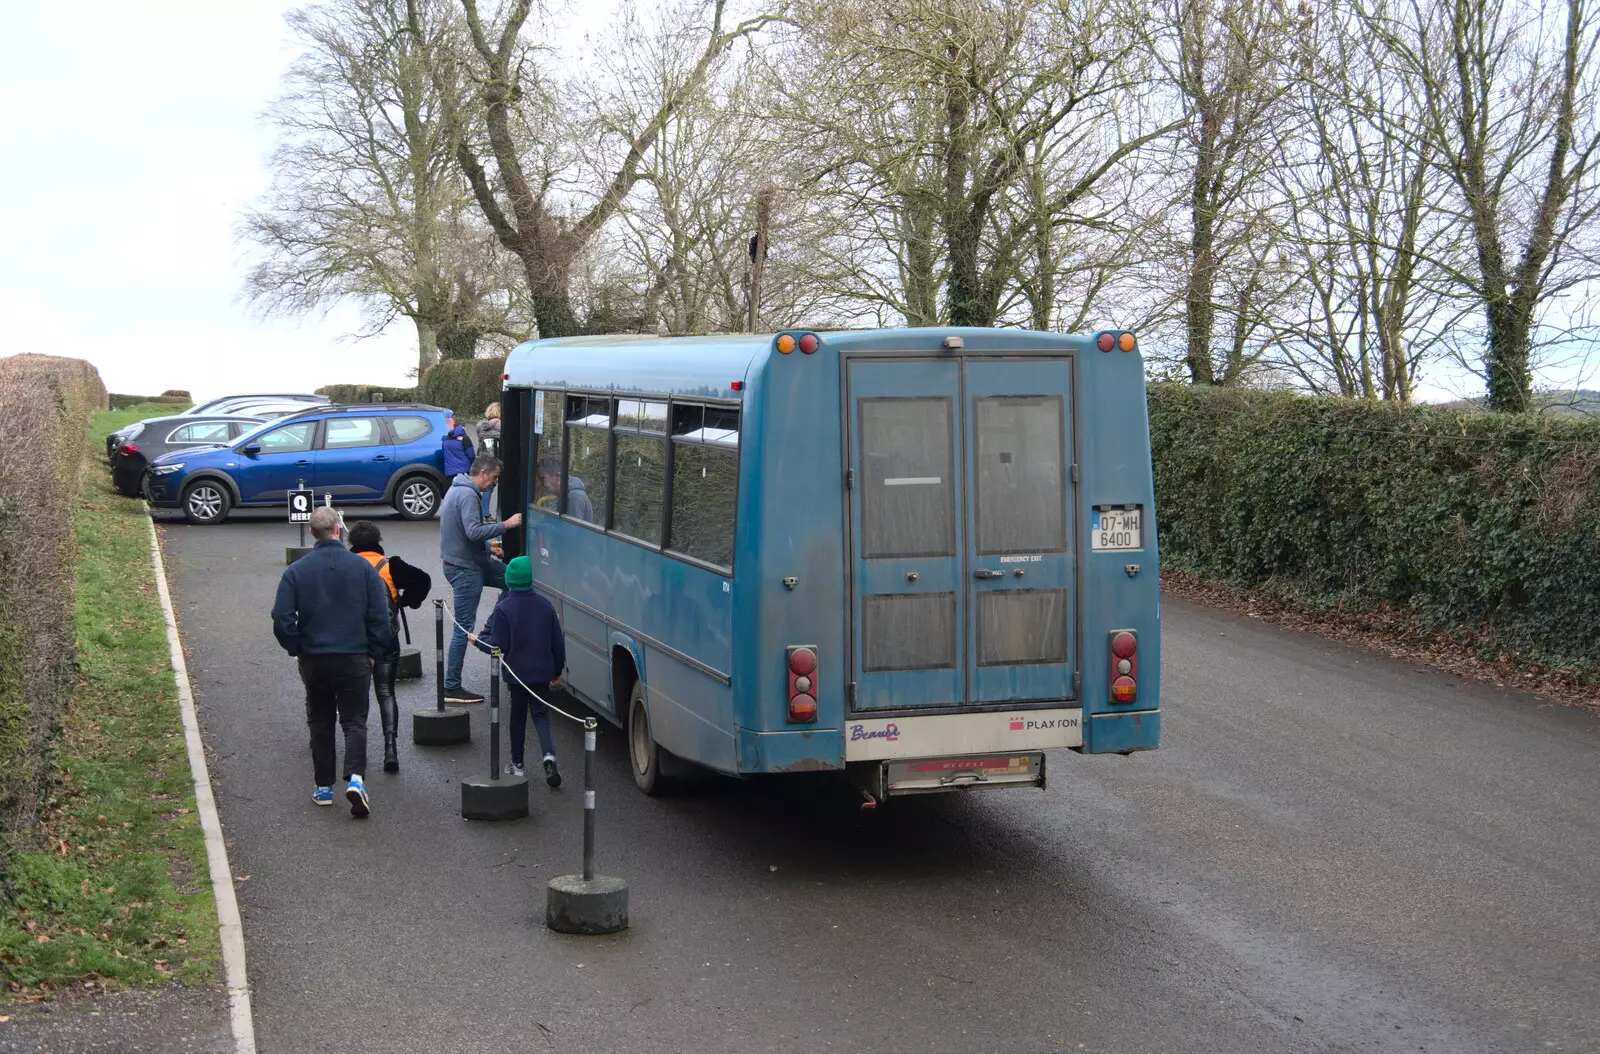 Our bus is nearly as old as the tomb, from Blackrock North and Newgrange, County Louth, Ireland - 16th February 2023